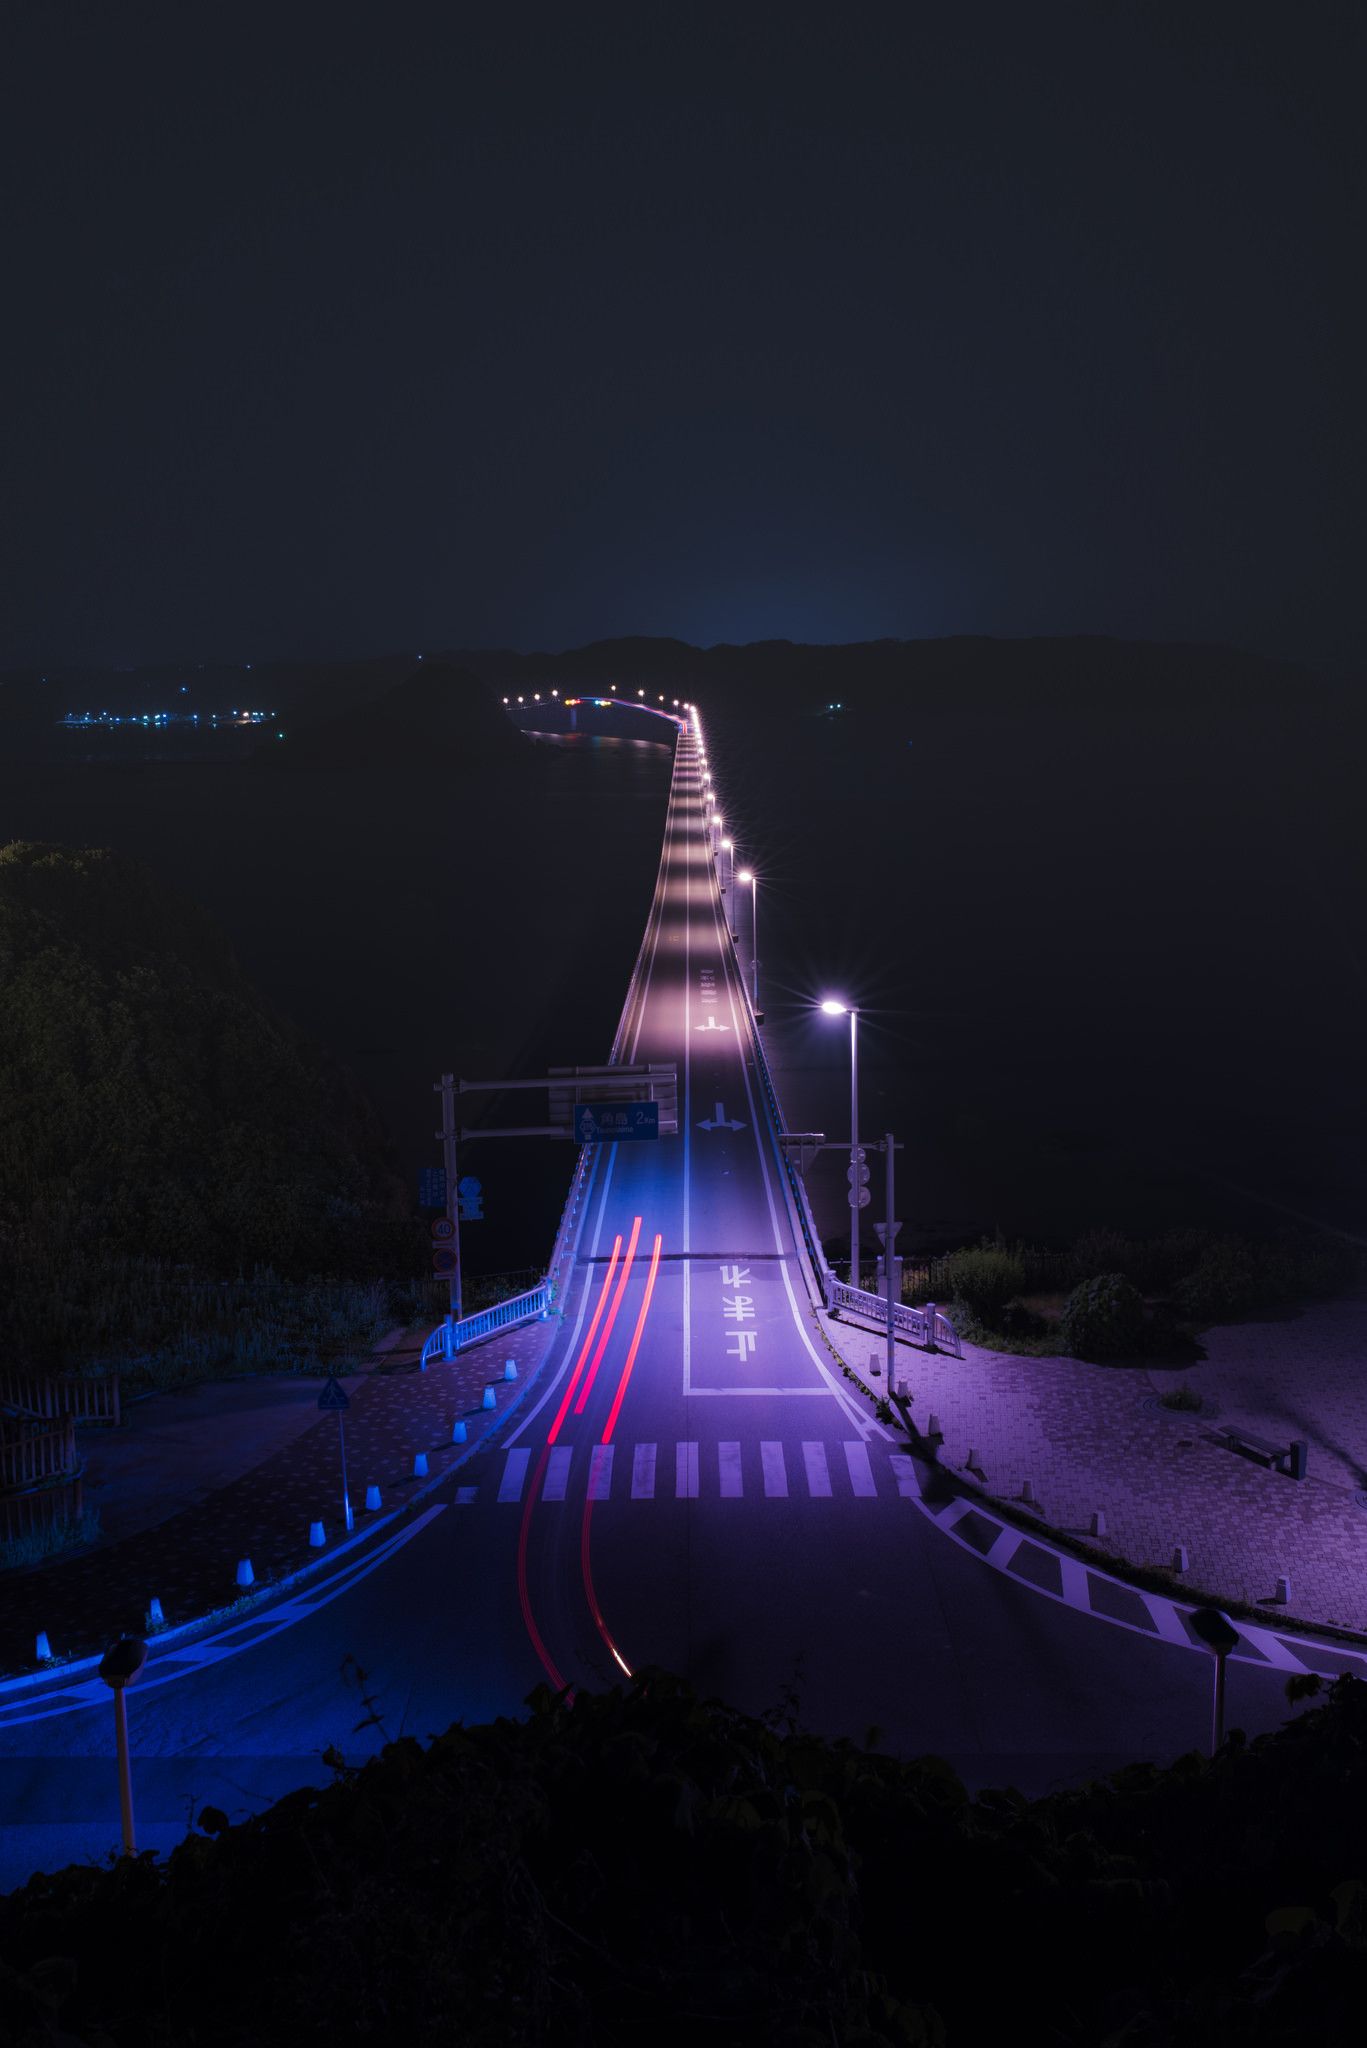 A long bridge with lights on it at night - 80s